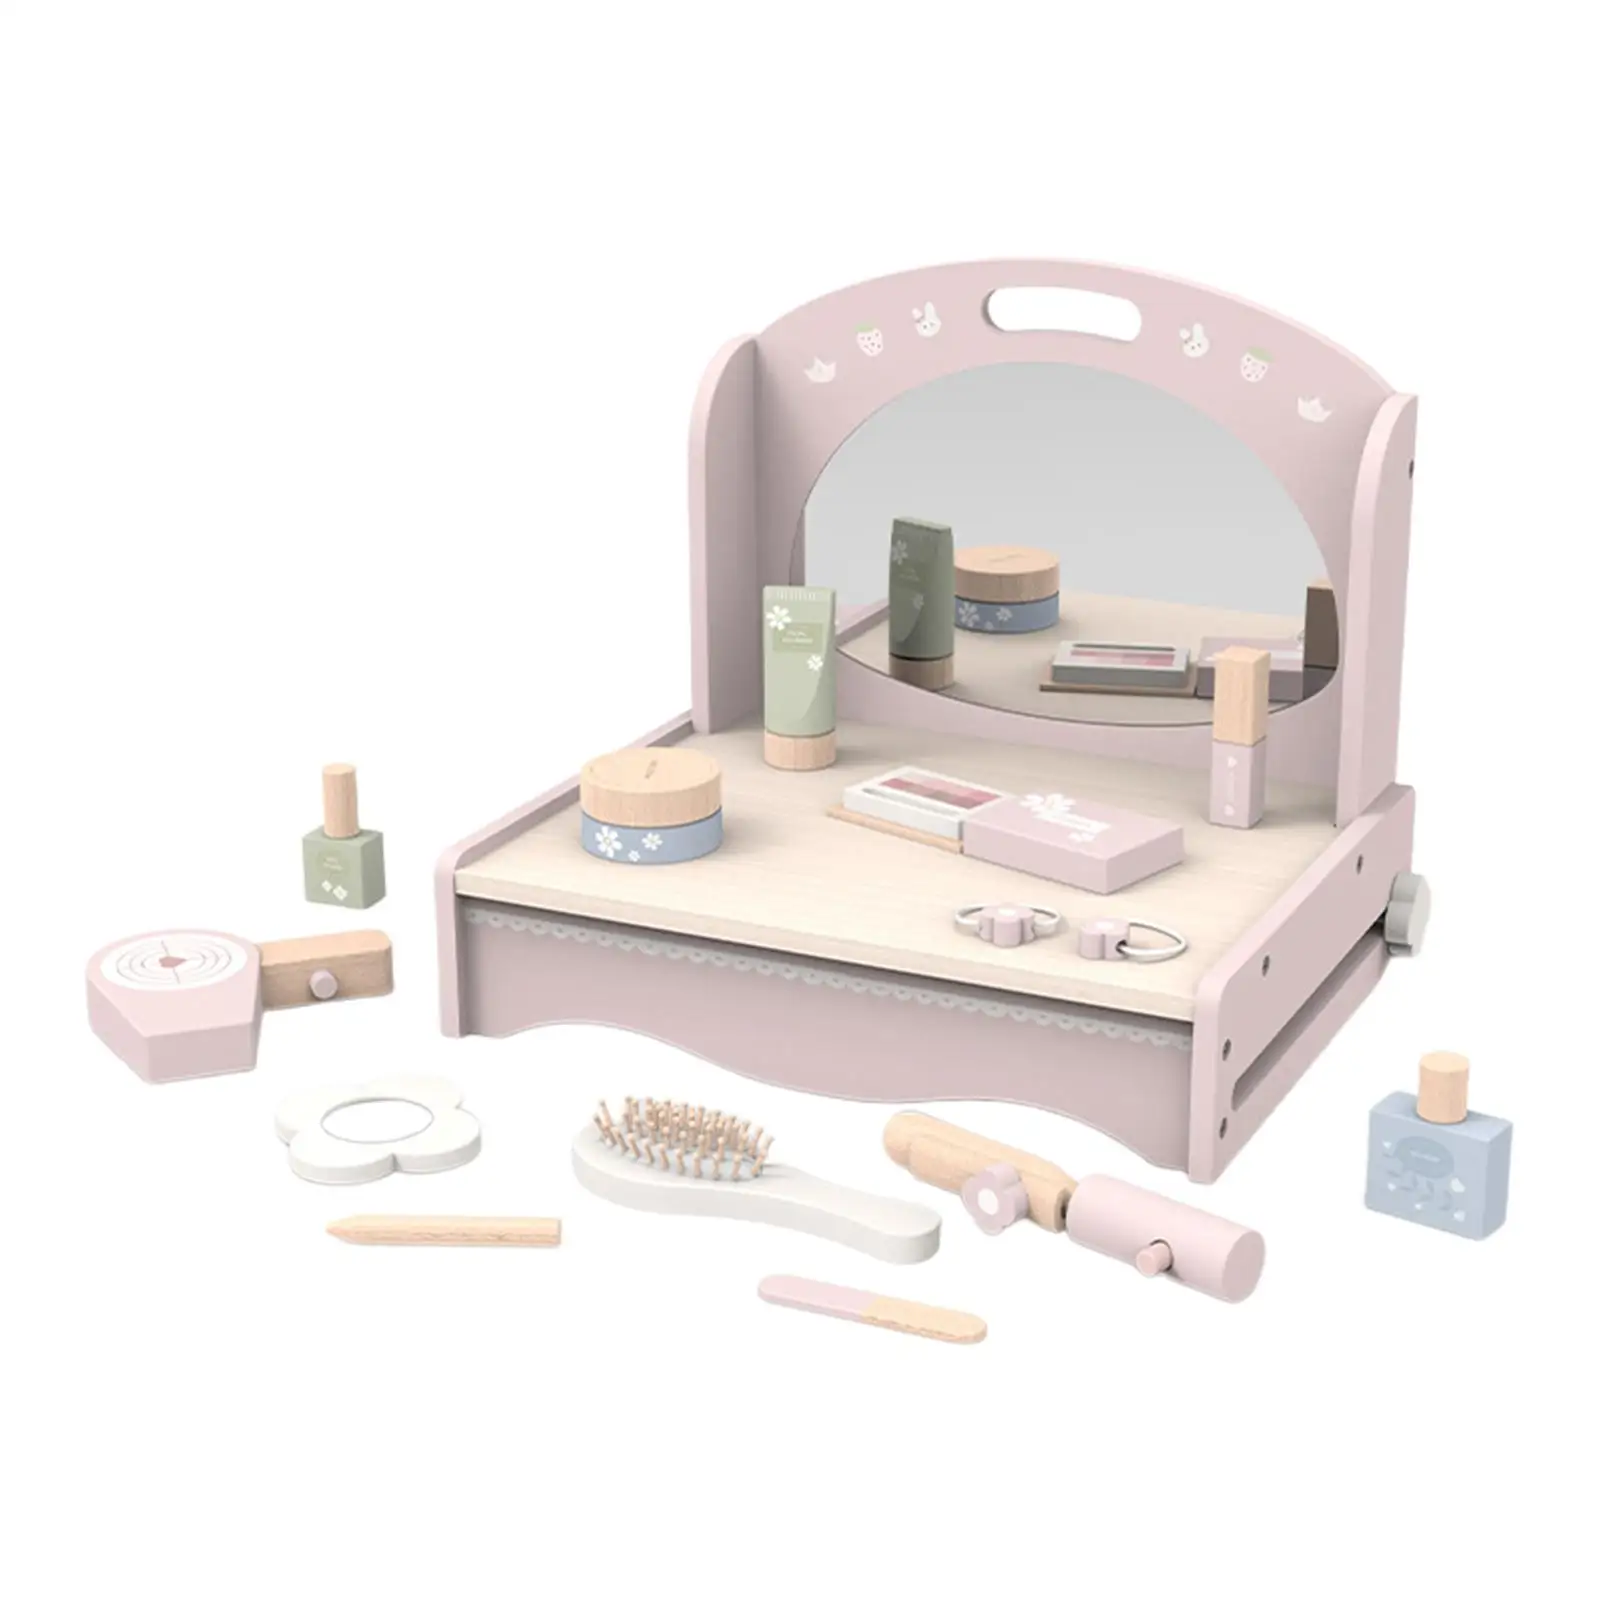 Potable Kids Makeup Sets Kids vanity Table Simulation Play Room Pretend Play Makeup Toy dress Table Toy for Game Gift